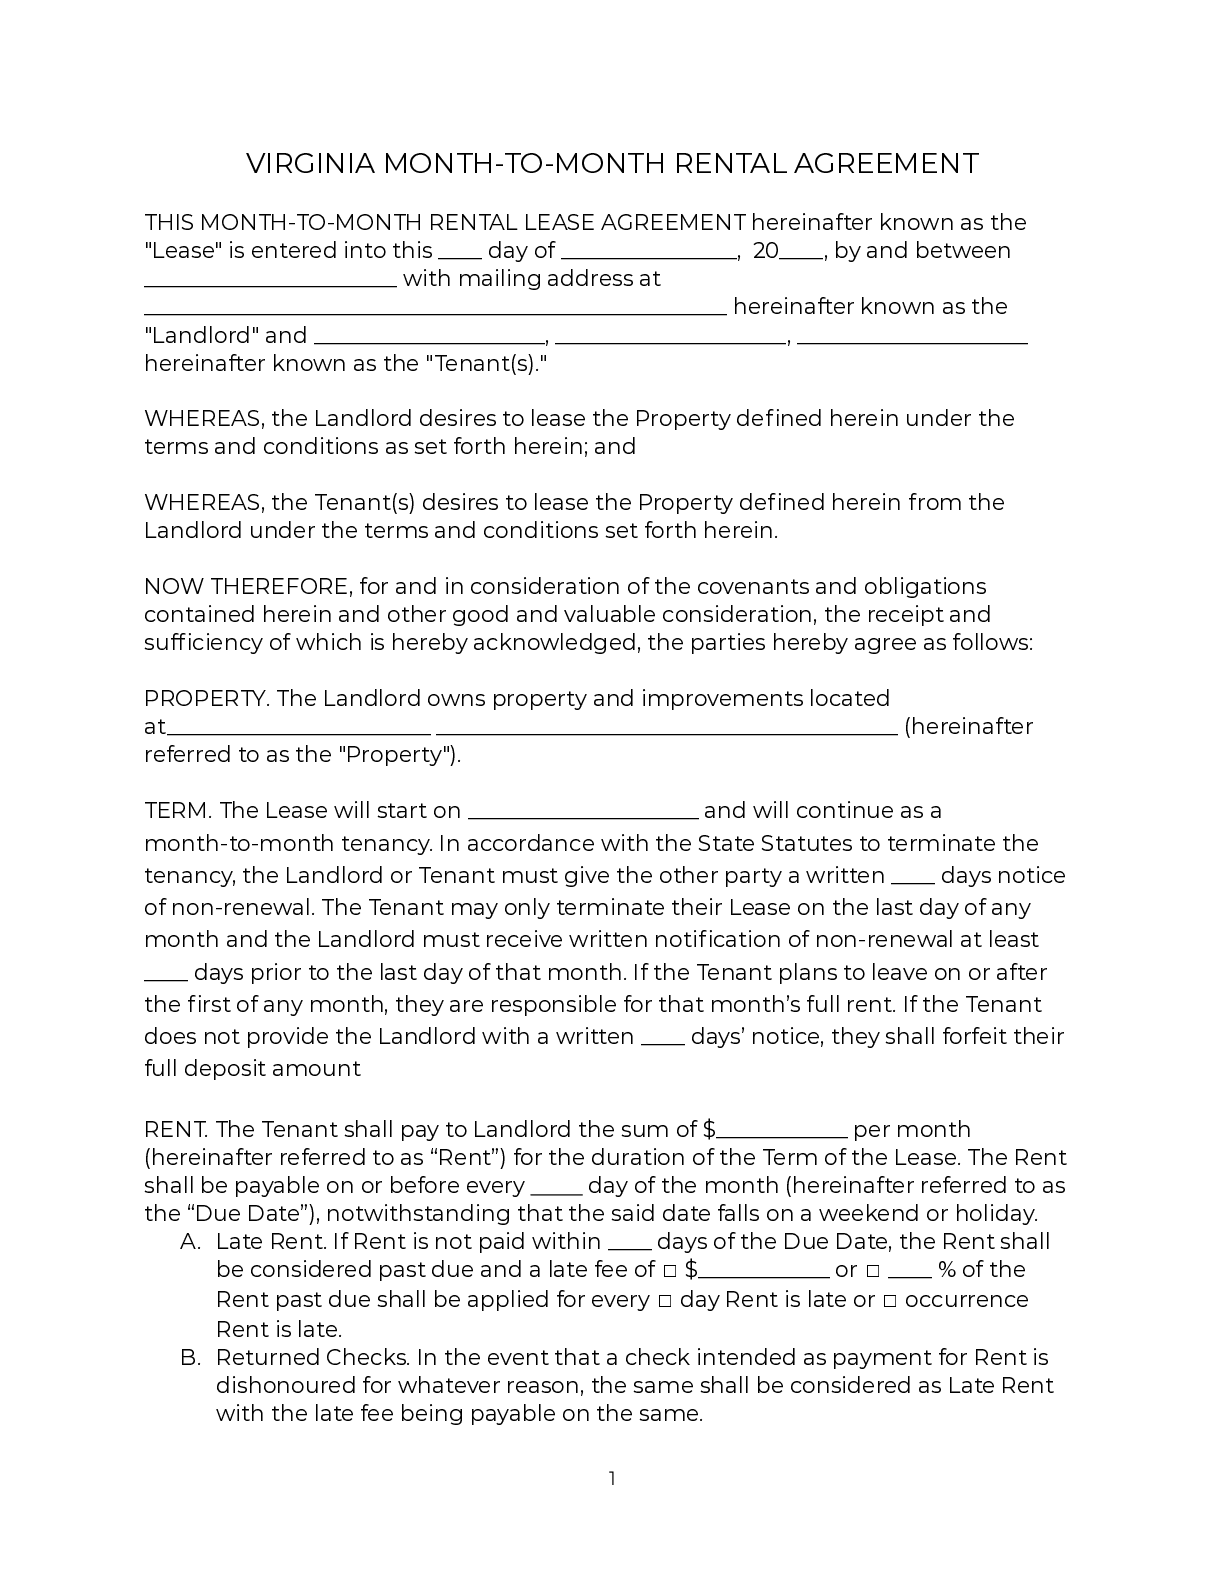 virginia-lease-agreement-free-2021-official-pdf-word